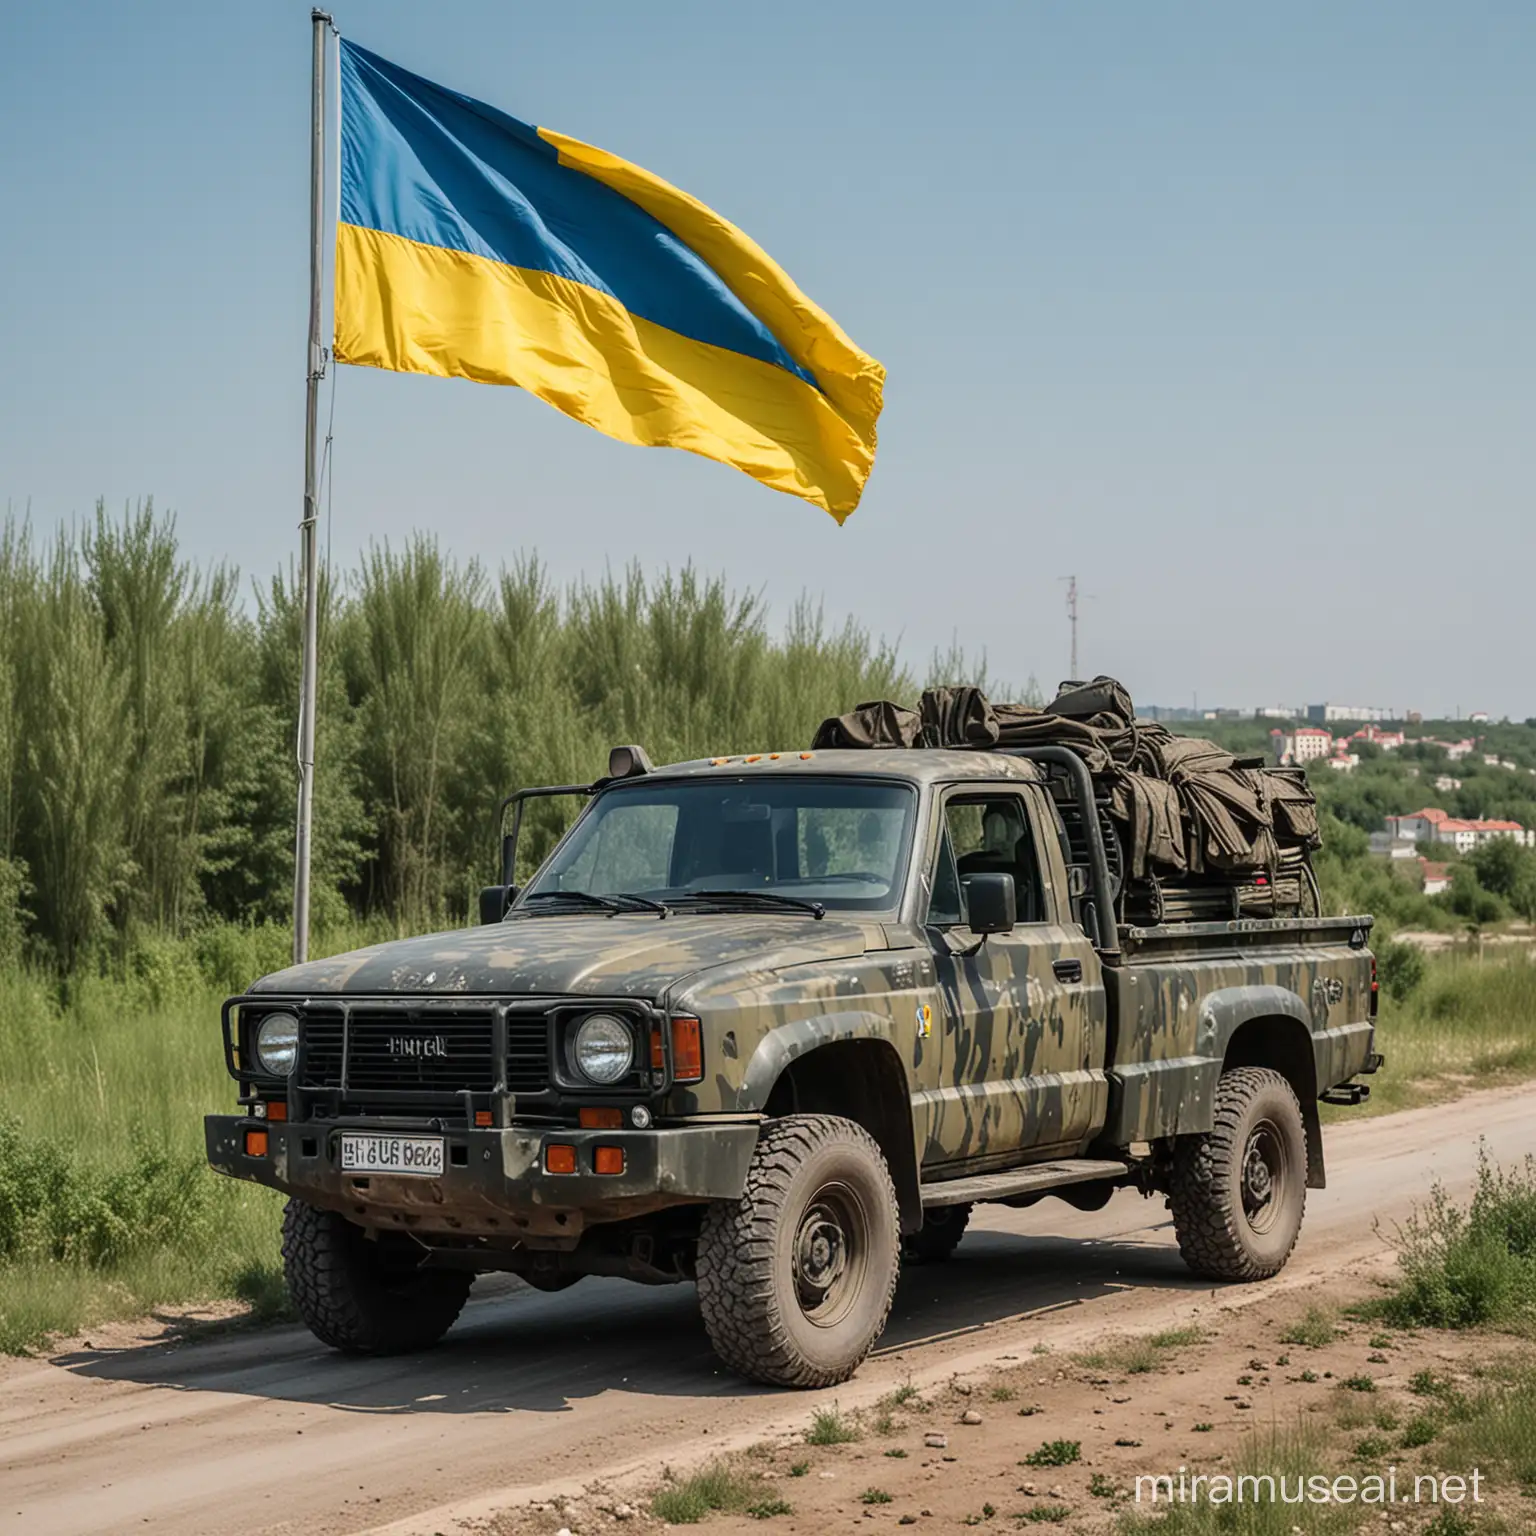 Camouflage PickUp Truck with Ukrainian Flag in Urban Donbas Landscape